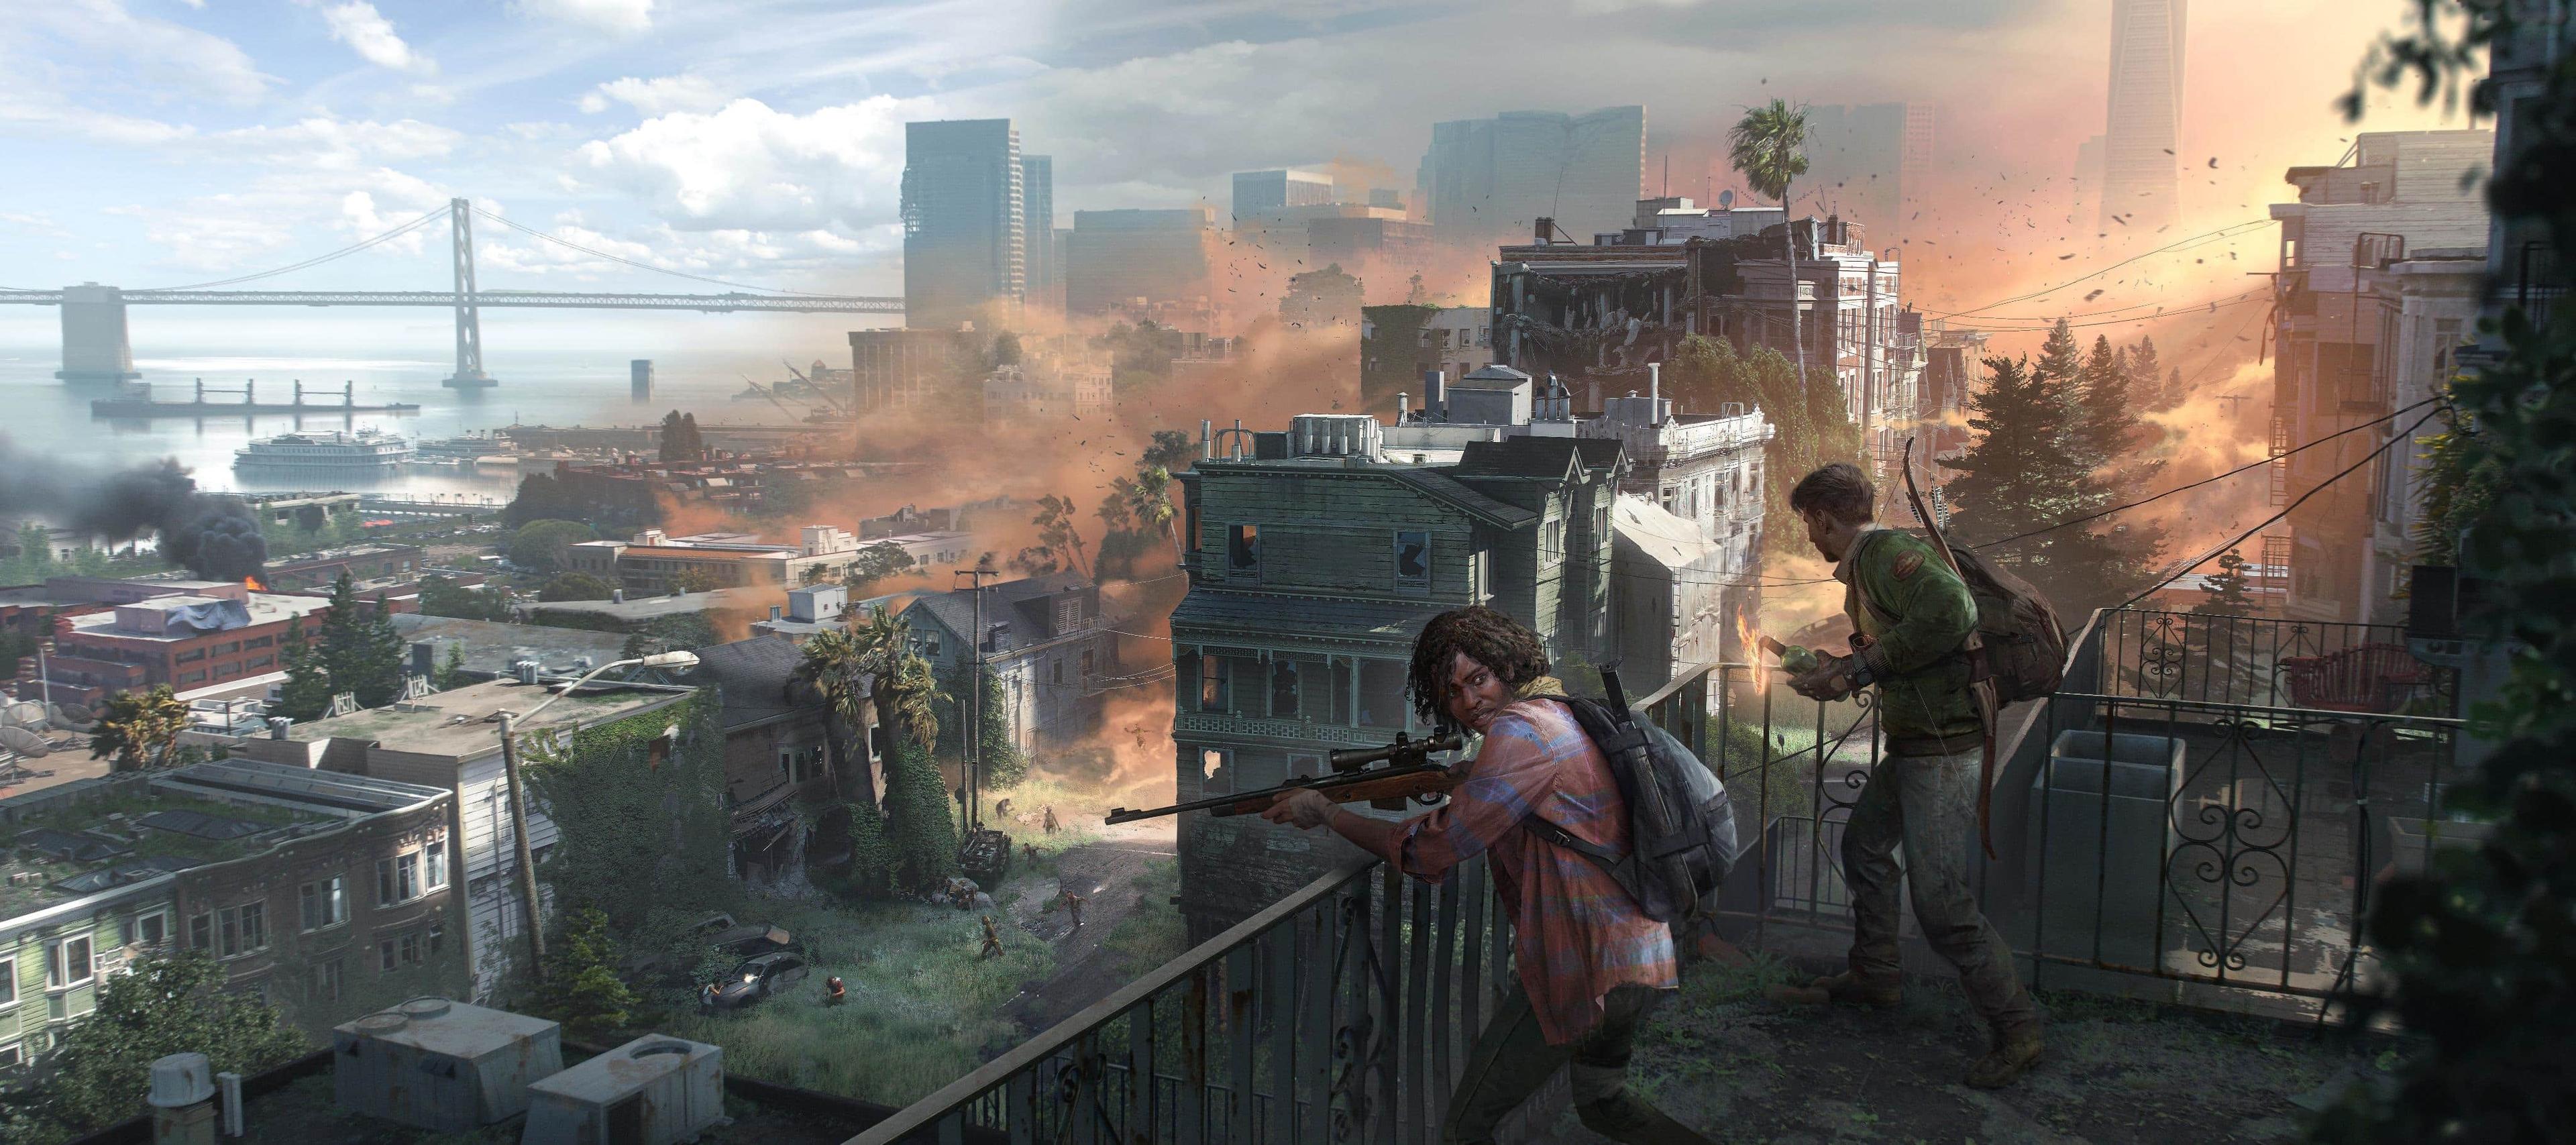 The Last of Us Episode 5 review: A brutal, heartbreaking nightmare